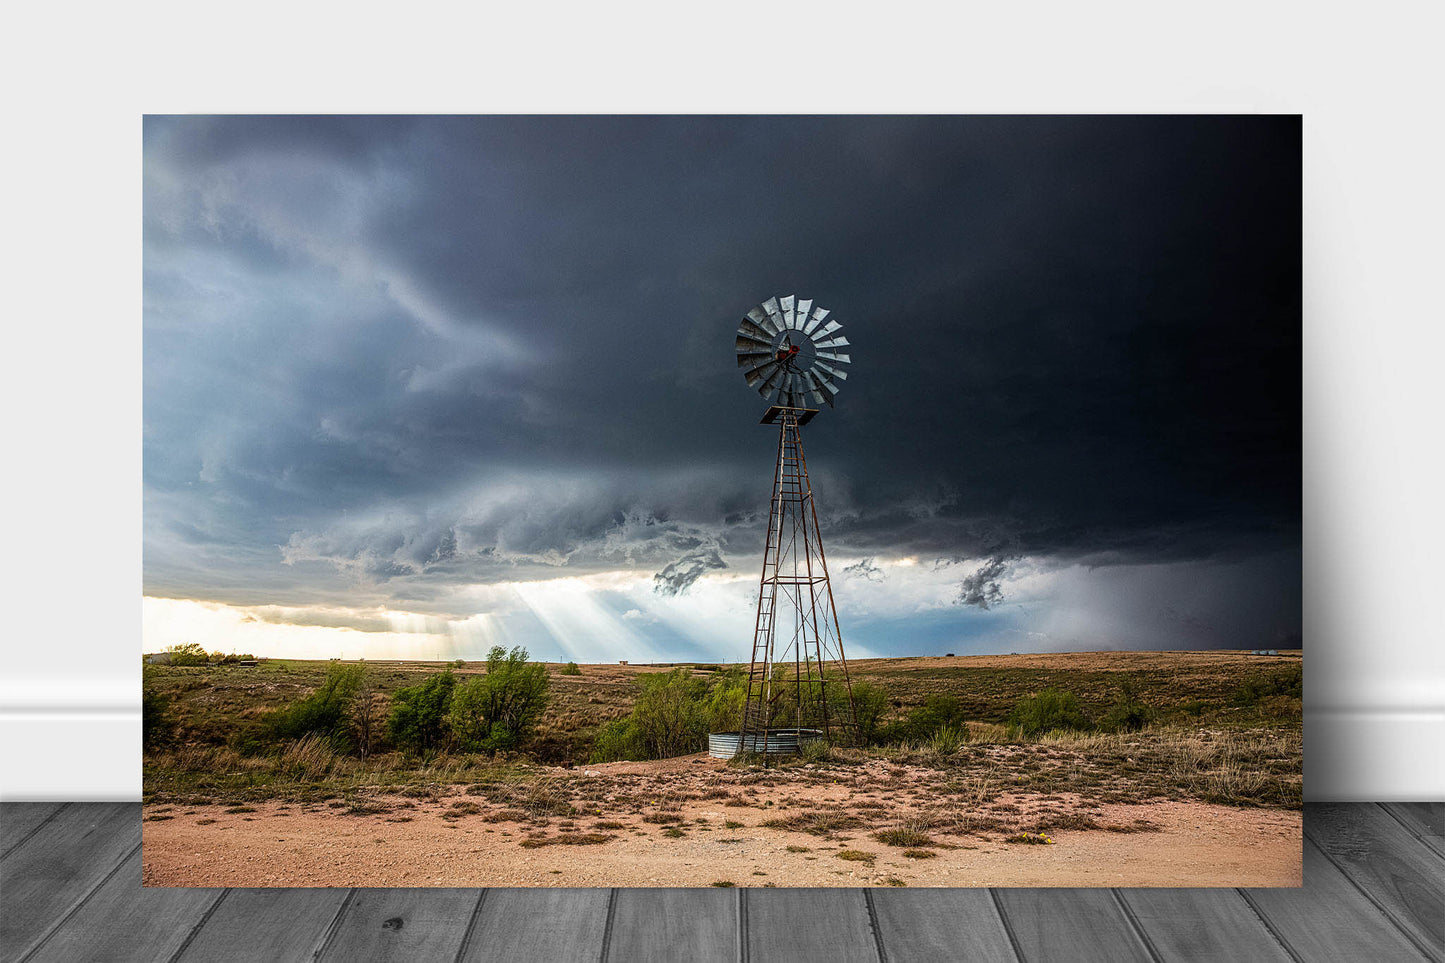 Country aluminum metal print wall art of sunbeams breaking through an intense storm as an Aermotor windmill stands tall over the prairie landscape on a spring day in Texas by Sean Ramsey of Southern Plains Photography.